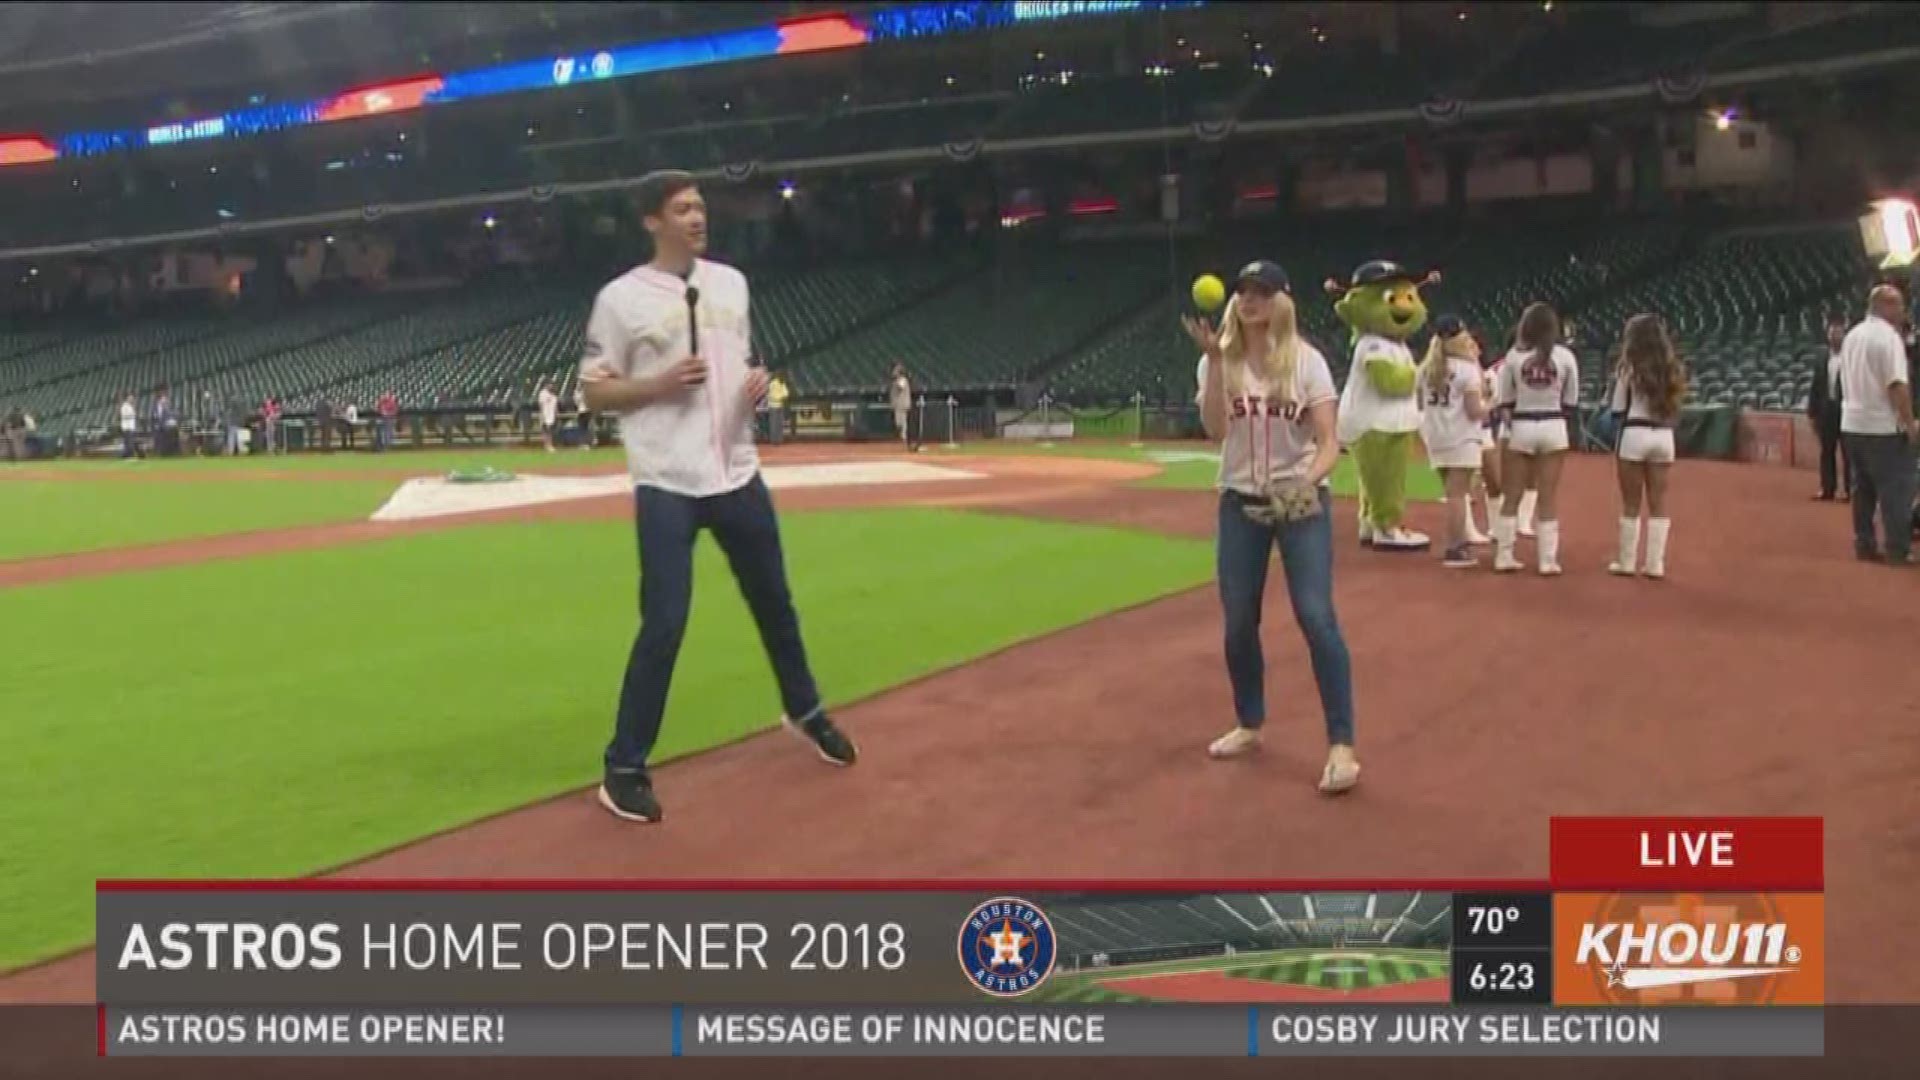 Brandi Smith  KHOU on X: GUYS. The @astros Team Store has a limited  supply of the vintage-style sweater @KateUpton wore last season! But  they're not cheap; it'll set you back $200. #